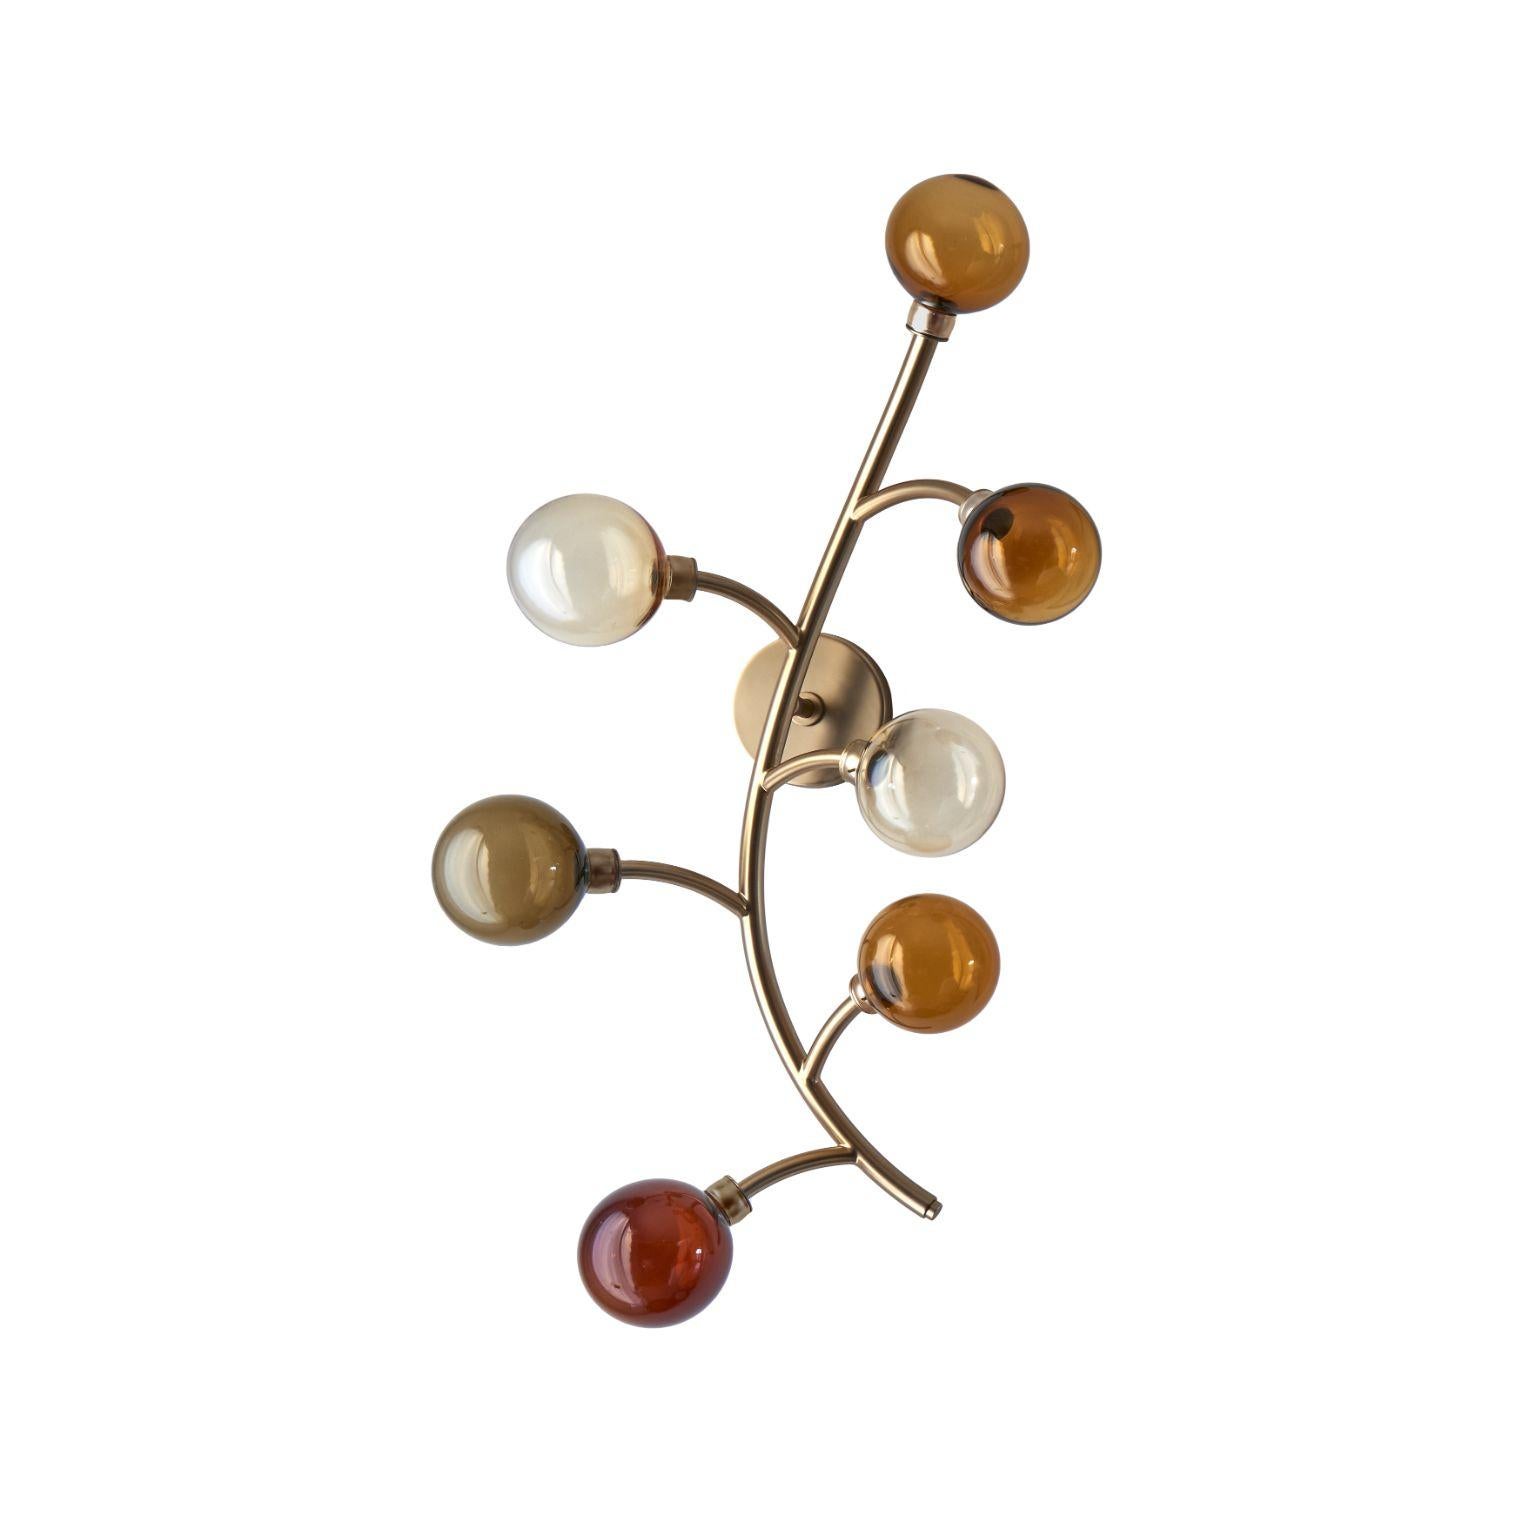 Dionysos sconce by Emilie Lemardeley.
Dimensions: D15 x W39 x H70 cm.
Materials: brass and hand blown glass. Led 3W in each glass globe (21W).
Weight: 4 kg

The Dionysos lightings pay hommage to their namesake, the Greek God of Wine. They are